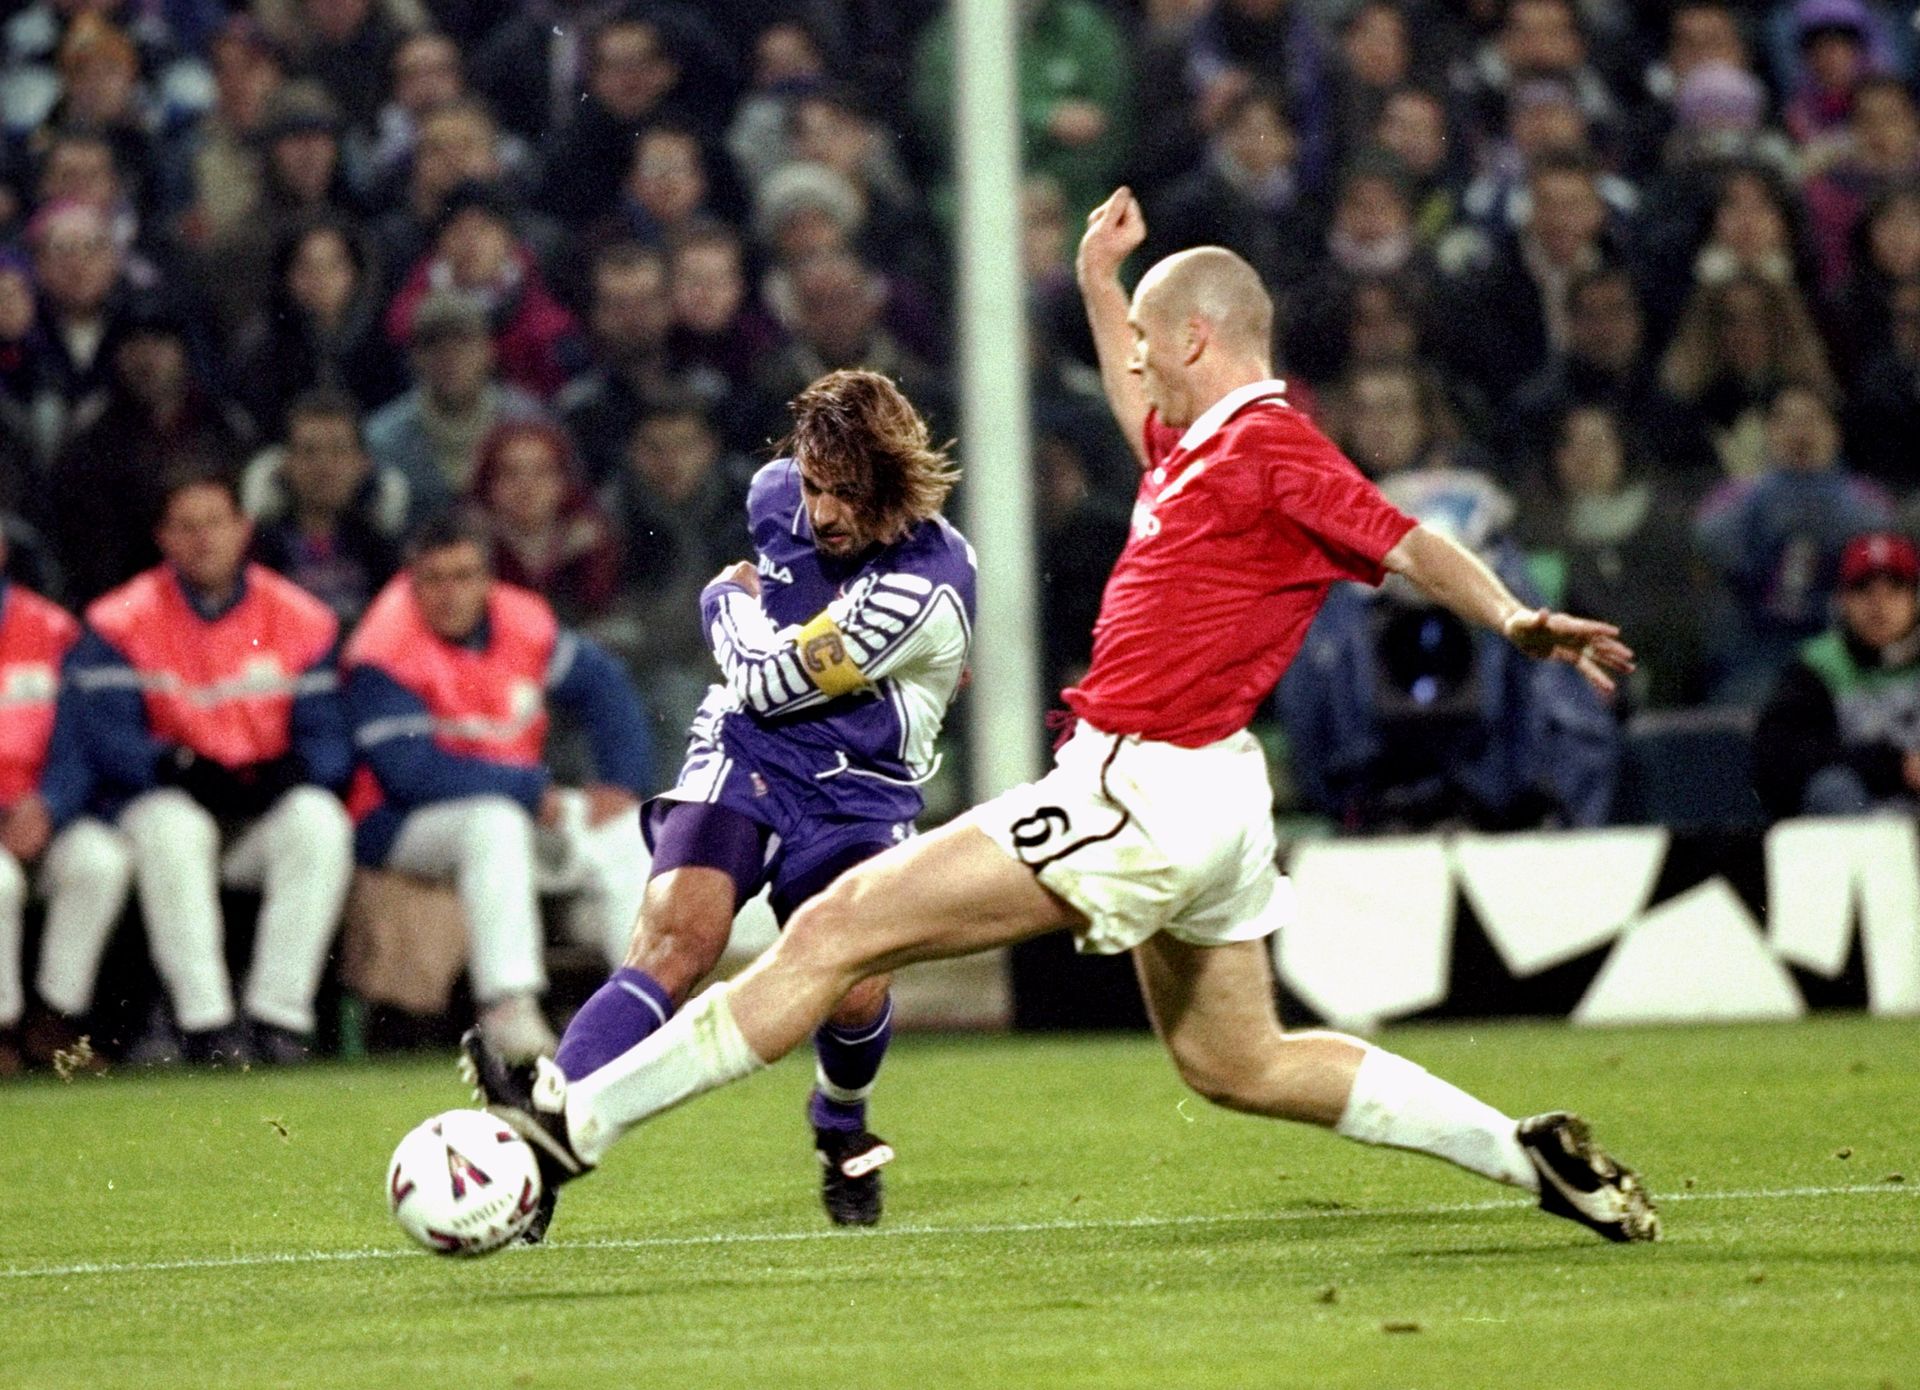 <p>                     Jaap Stam became the most expensive defender in history when he signed for Manchester United from PSV Eindhoven for £10.6 million (around €17m) in 1998.                   </p>                                      <p>                     A key part of United's treble-winning side in 1998/99, Stam was surprisingly sold to Lazio in 2001 and went on to spend several successful seasons in Italy with the Rome club and later AC Milan.                   </p>